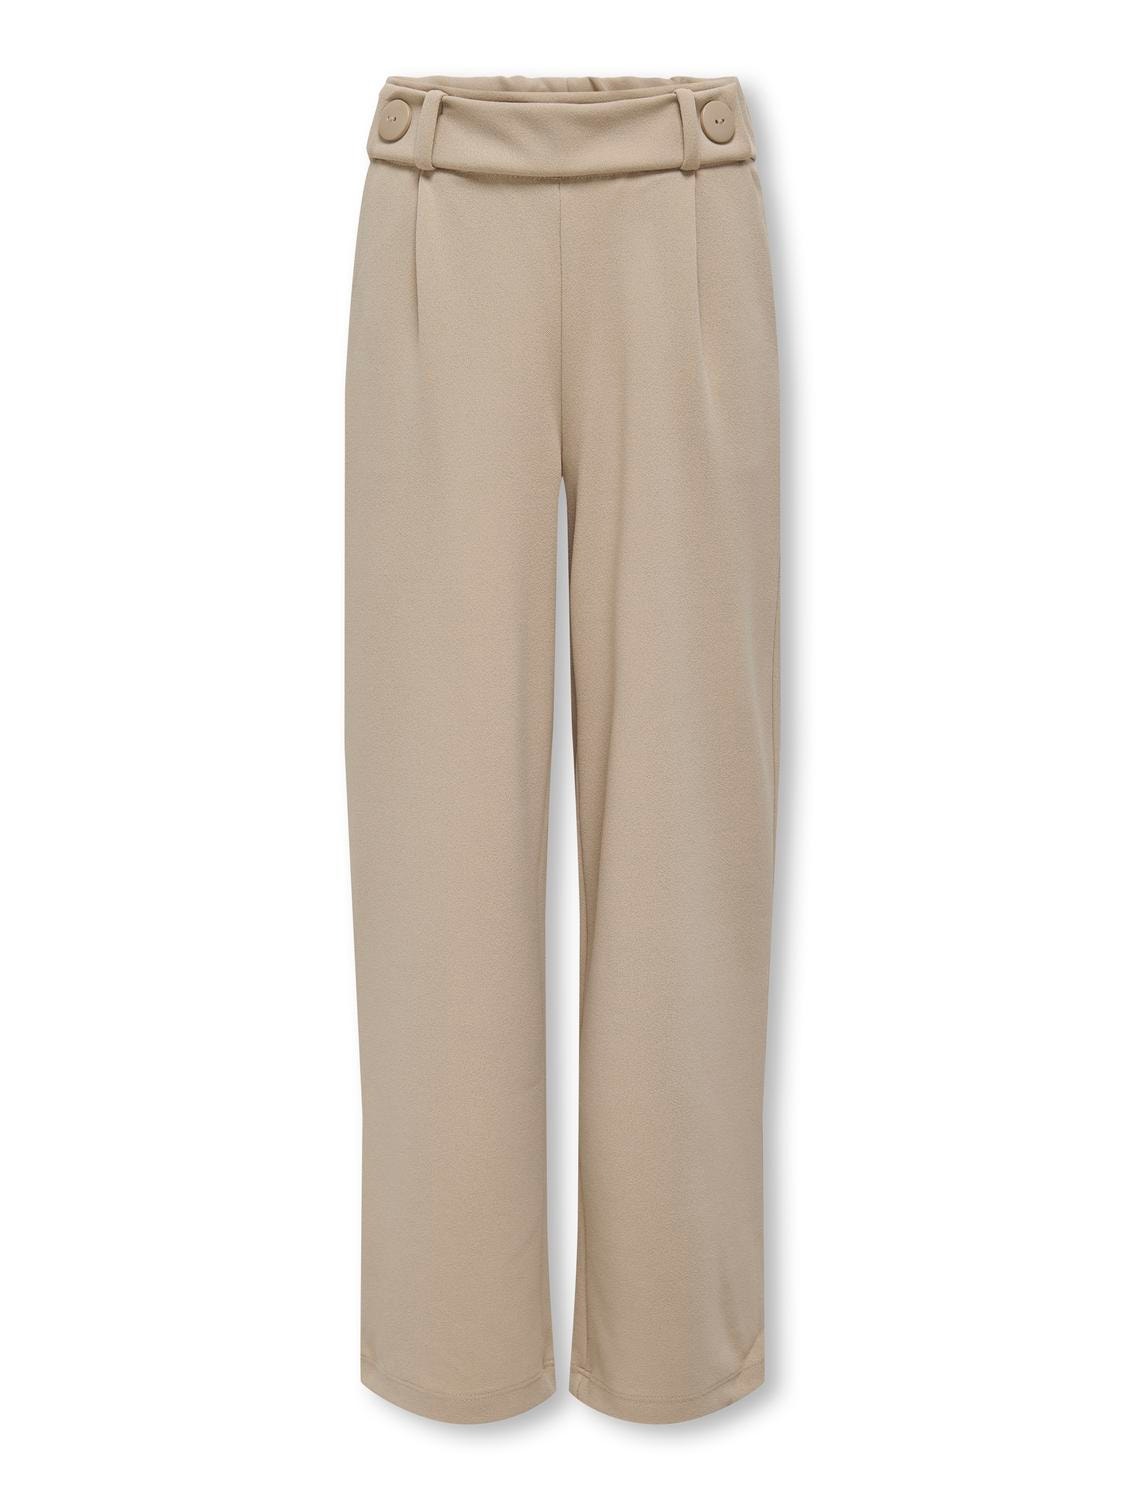 ONLY Classic pull-up pants -Humus - 15327742